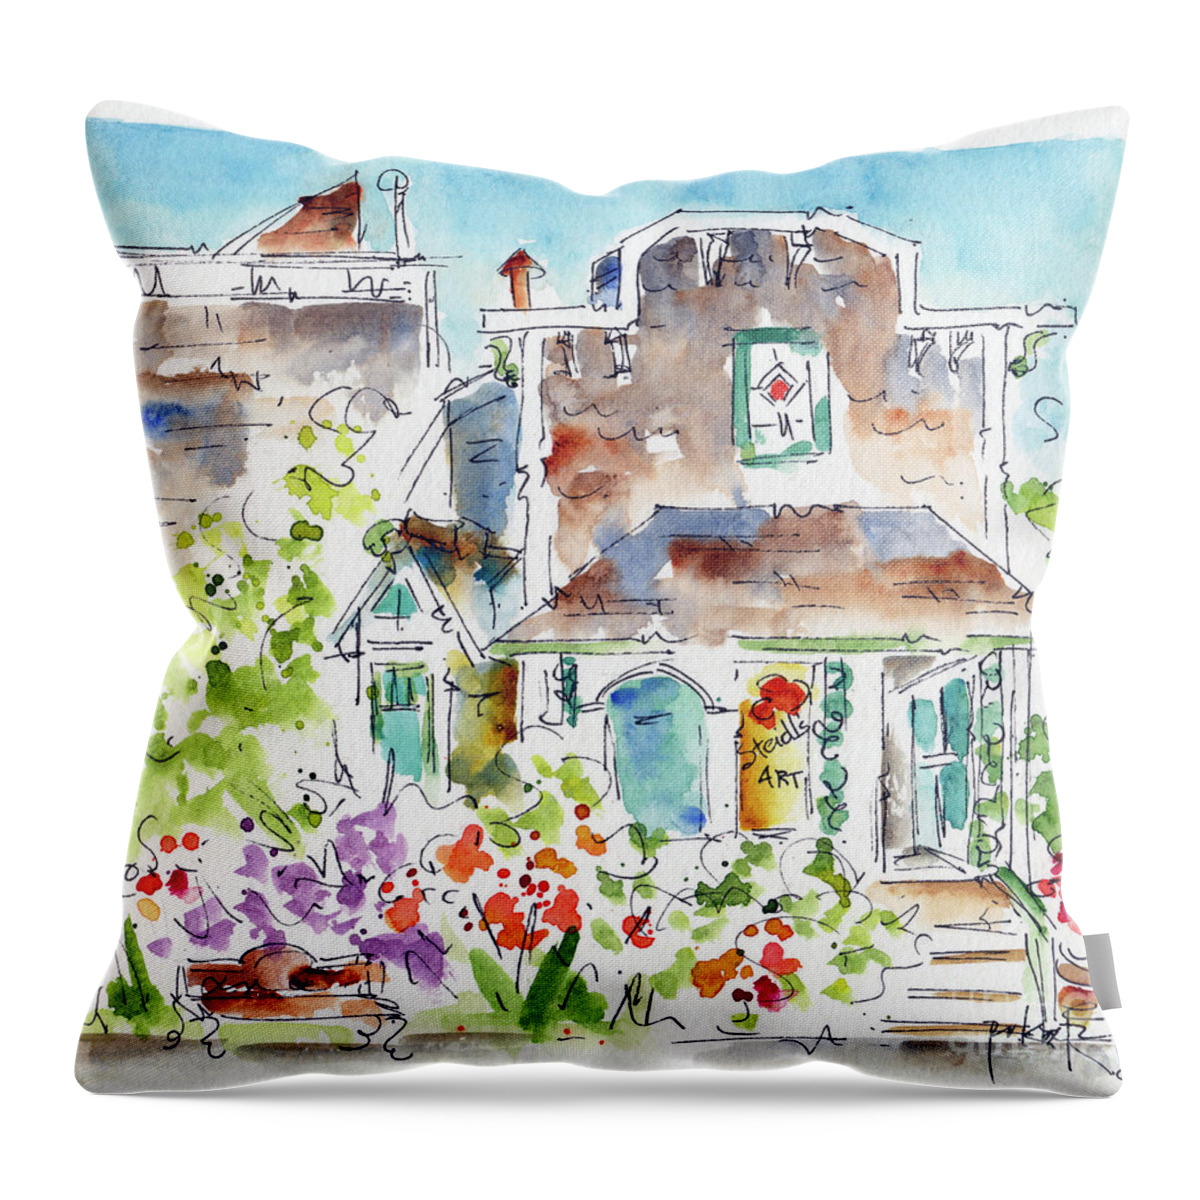 Impressionism Throw Pillow featuring the painting Steidls Art Gallery Cannon Beach by Pat Katz